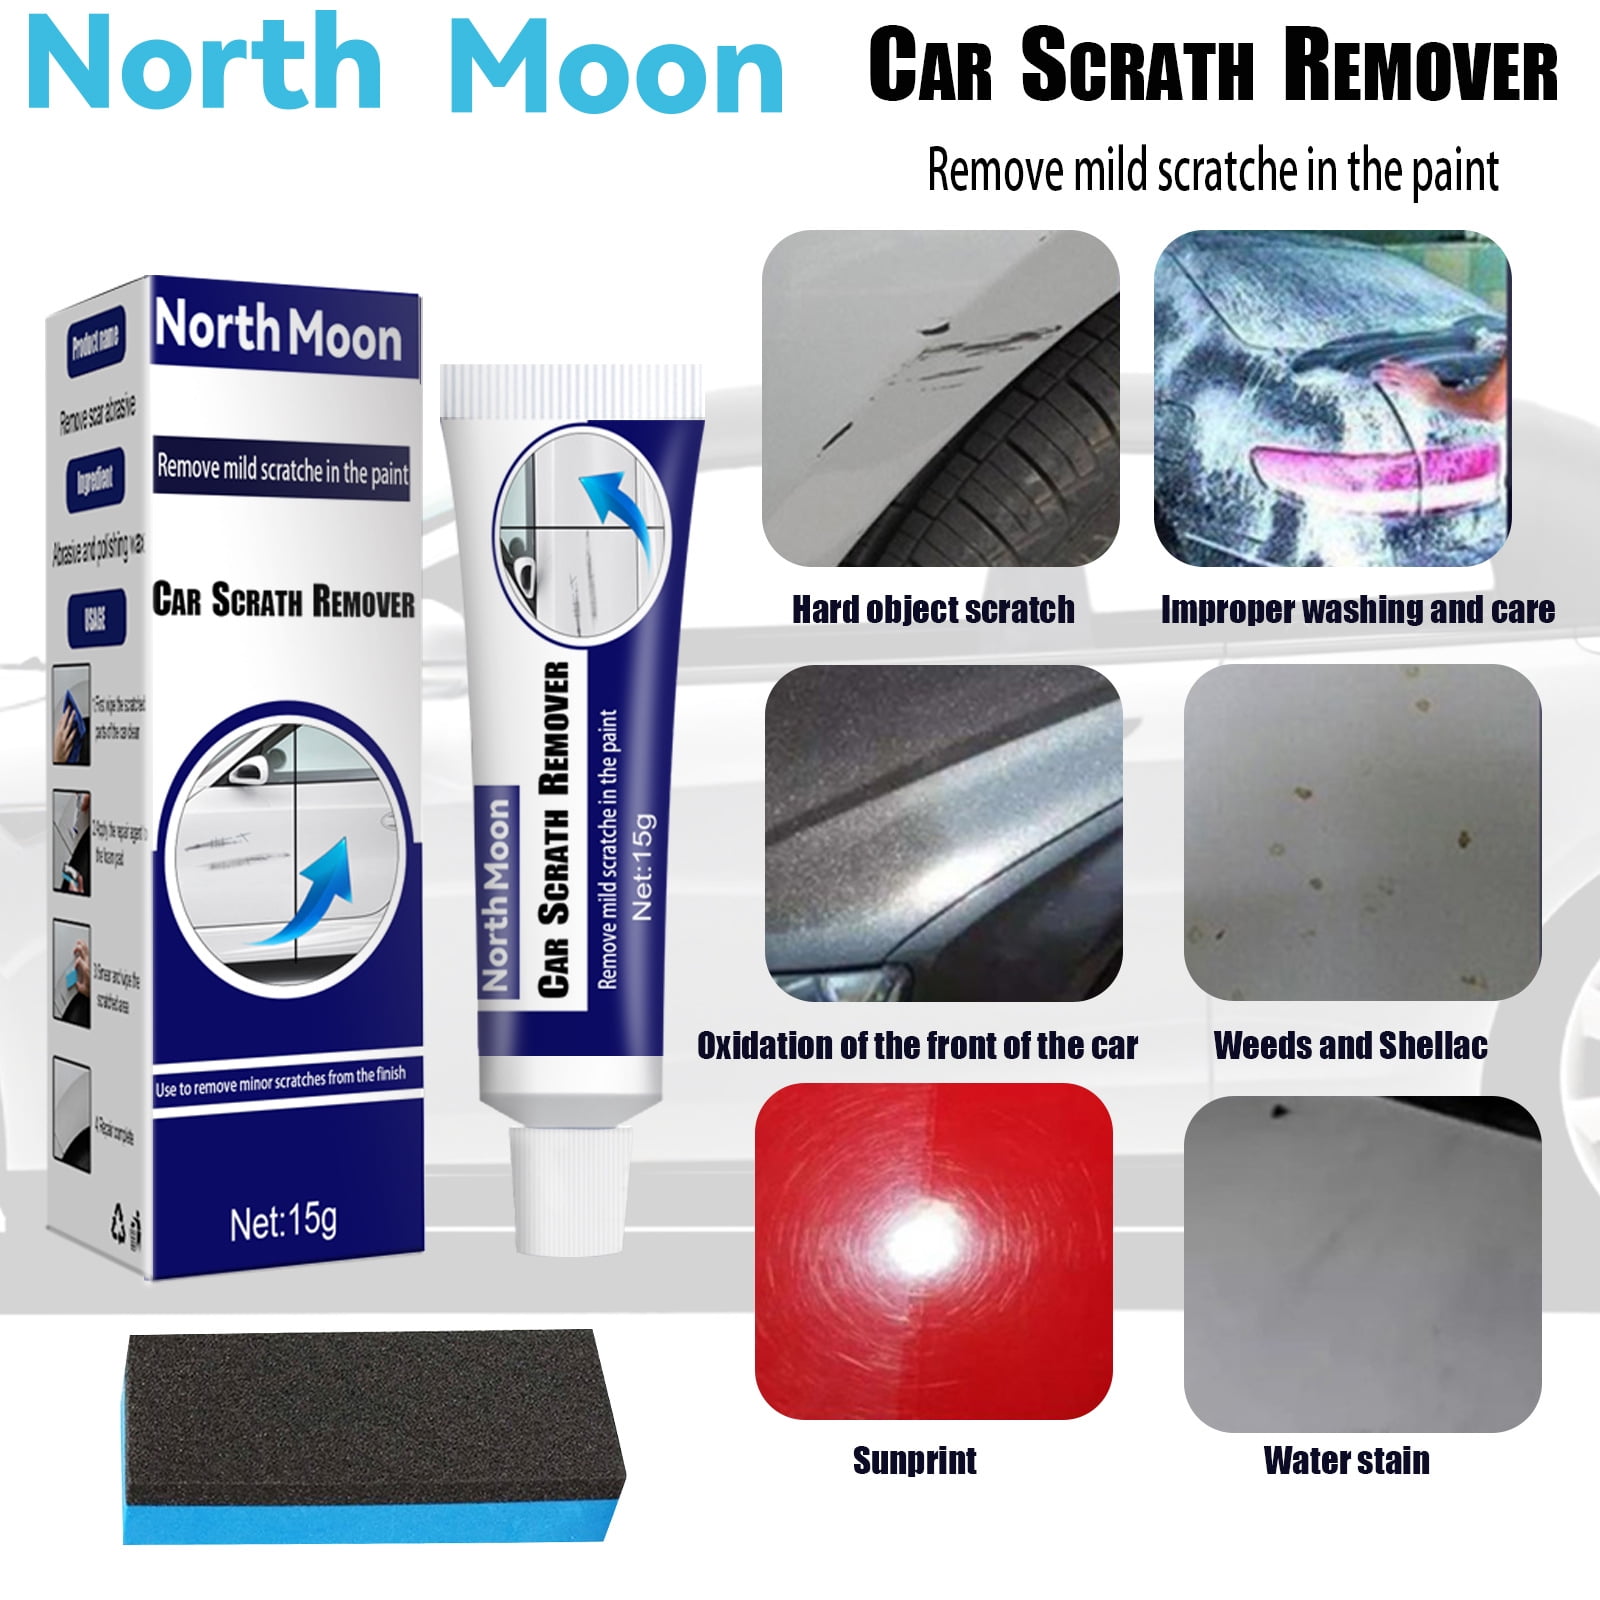 Erase Car Scratches With Sponge, Car Scratch Remover, Car Water